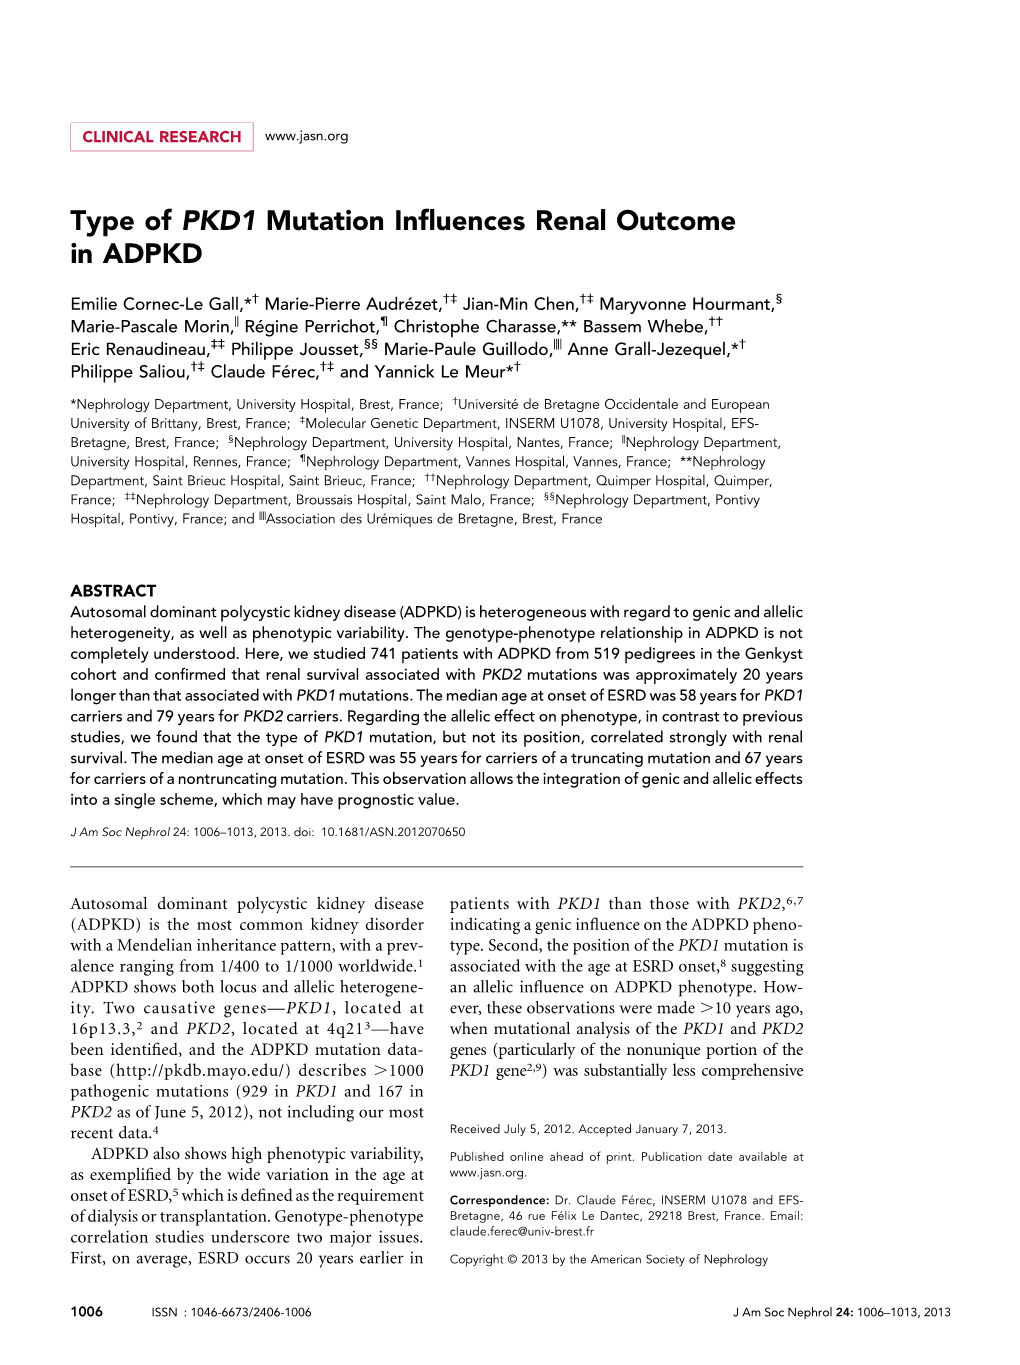 Type of PKD1 Mutation Influences Renal Outcome in ADPKD